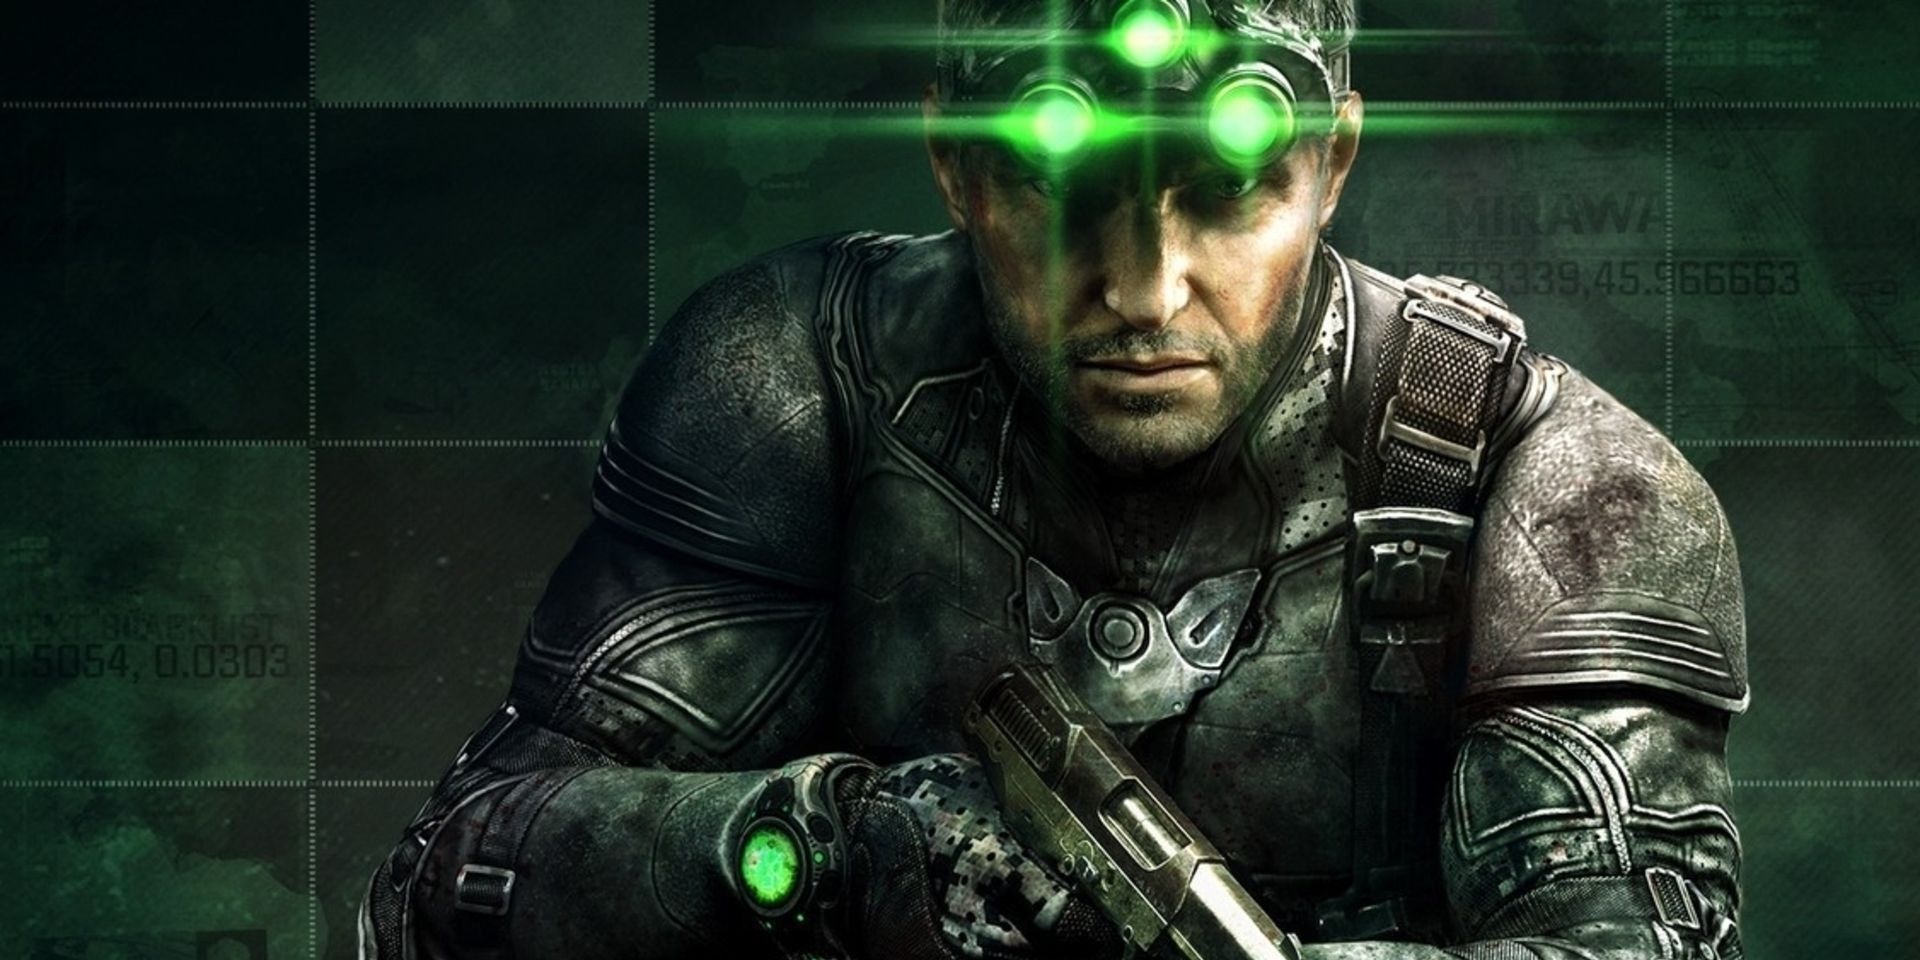 The Esports Club - Hands Up If you want anew Splinter Cell game! # SplinterCell #splintercellblacklist #Ubisoft #Uplay #UbisoftForward #Gaming  #PC #Xbox #PlayStation #PS5 #XboxSeriesX #XboxOne #PS4 #PlayStation4  #PlayStation5 #TEC #TheEsportsClub